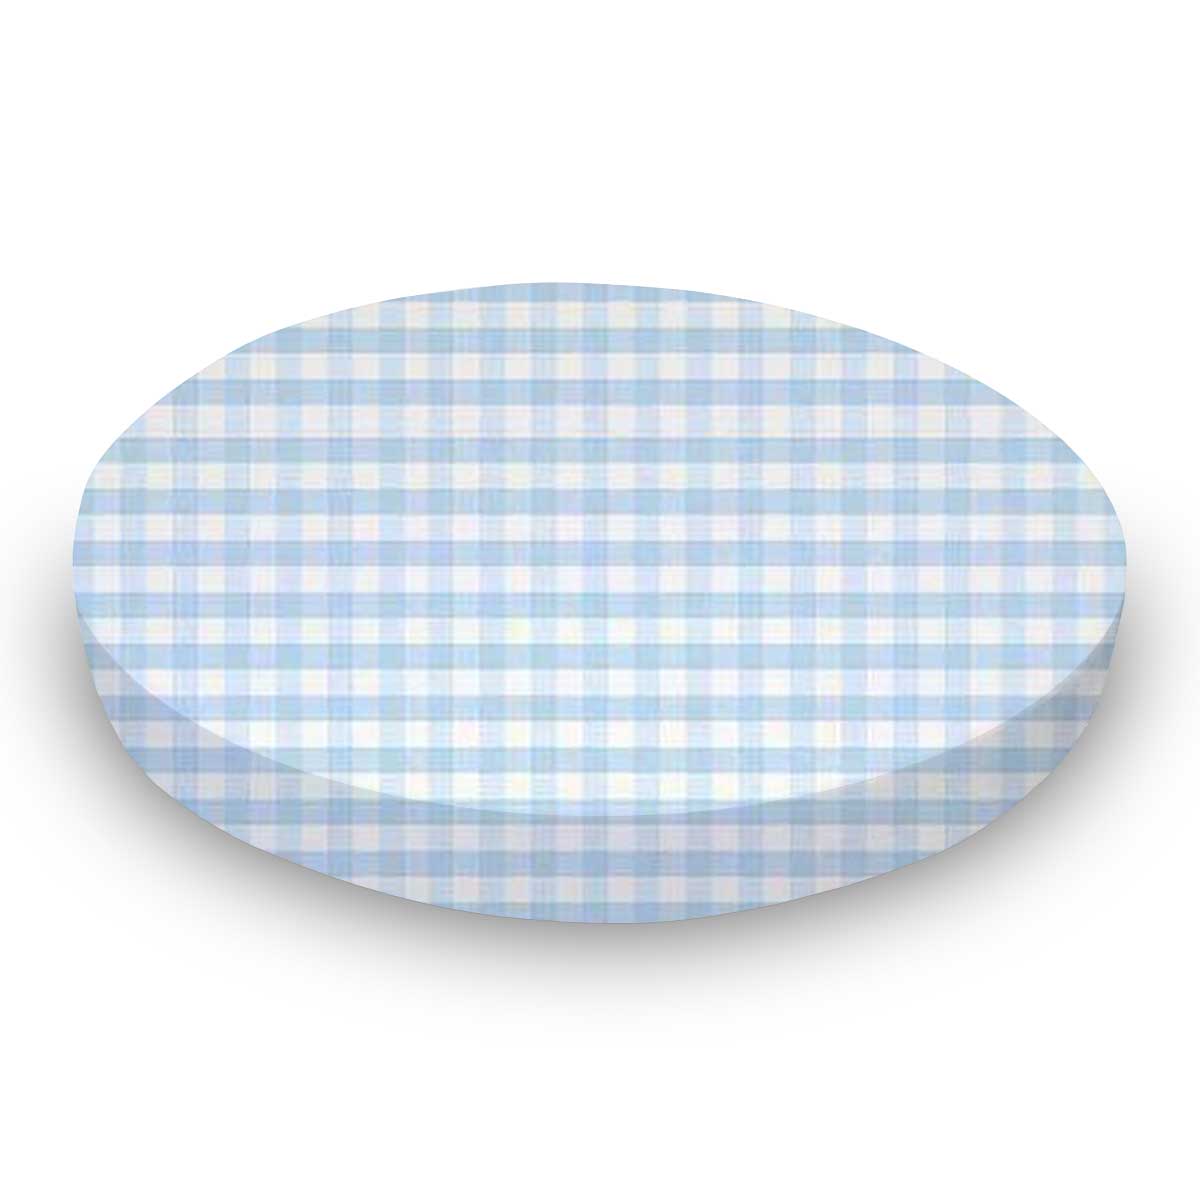 Oval (Stokke Mini) - Blue Gingham Jersey Knit - Fitted  Oval